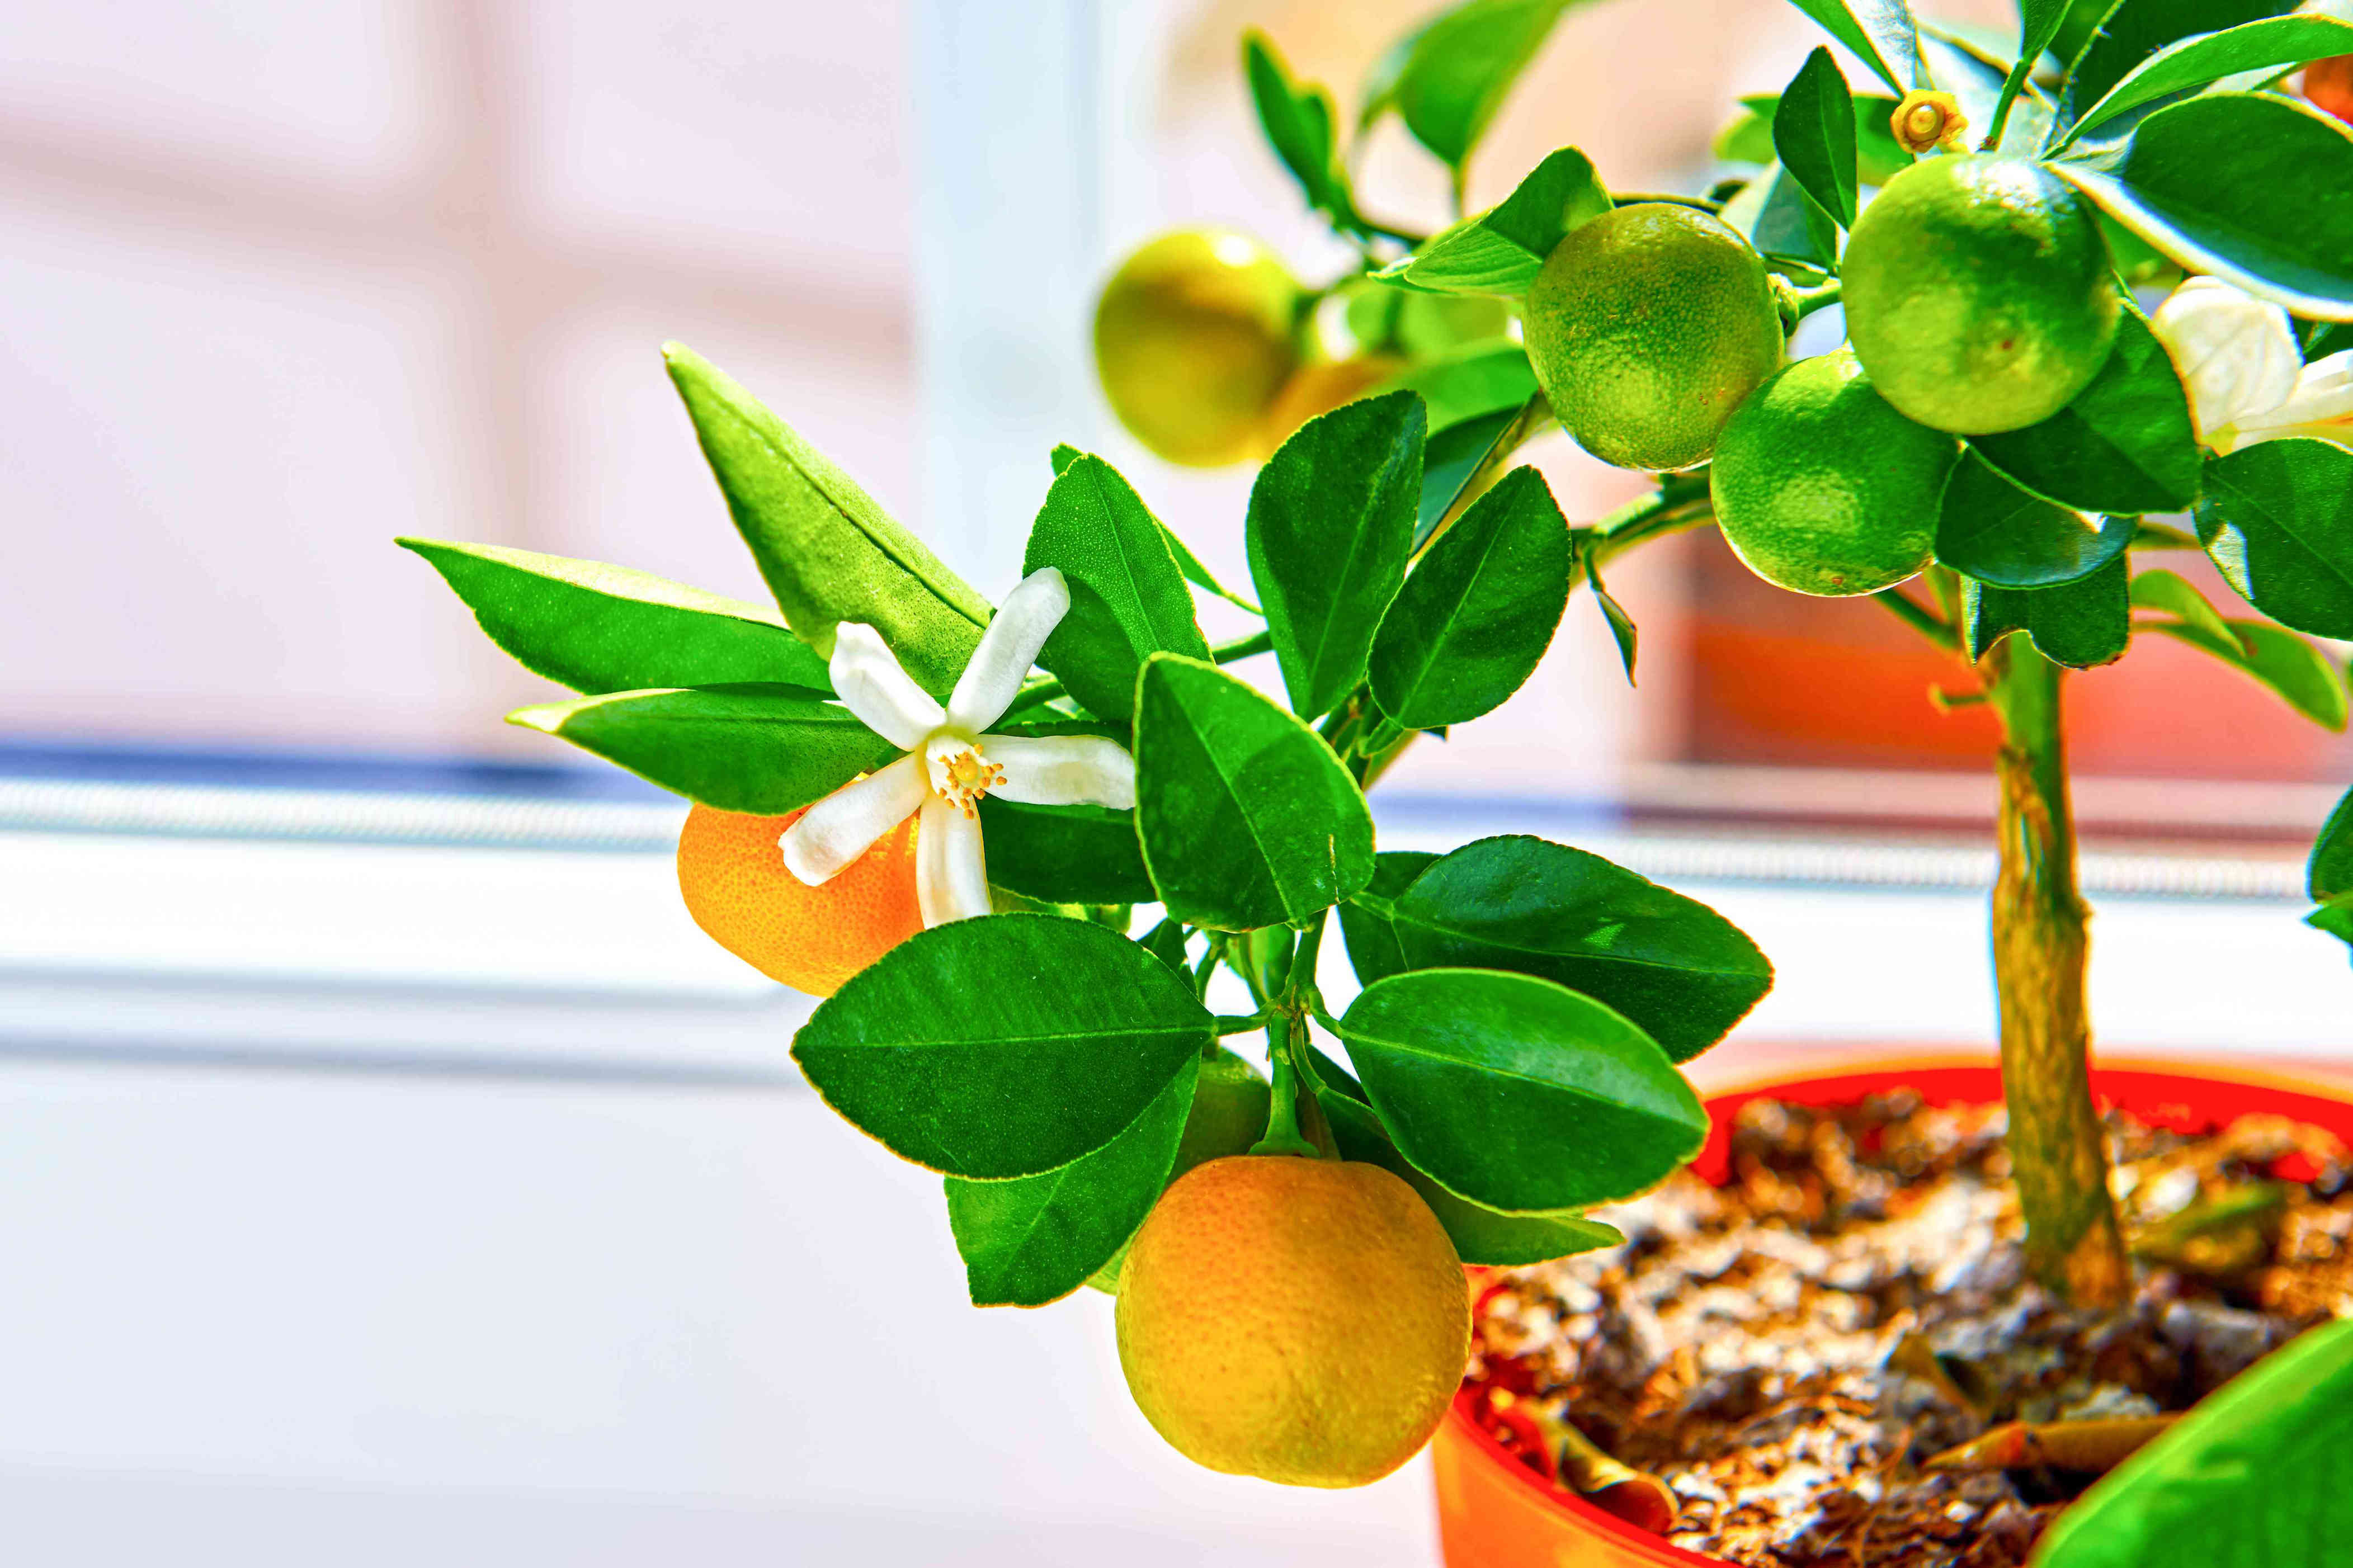 12 Fragrant Indoor Plants That Will Make Your Home Smell Like a Garden